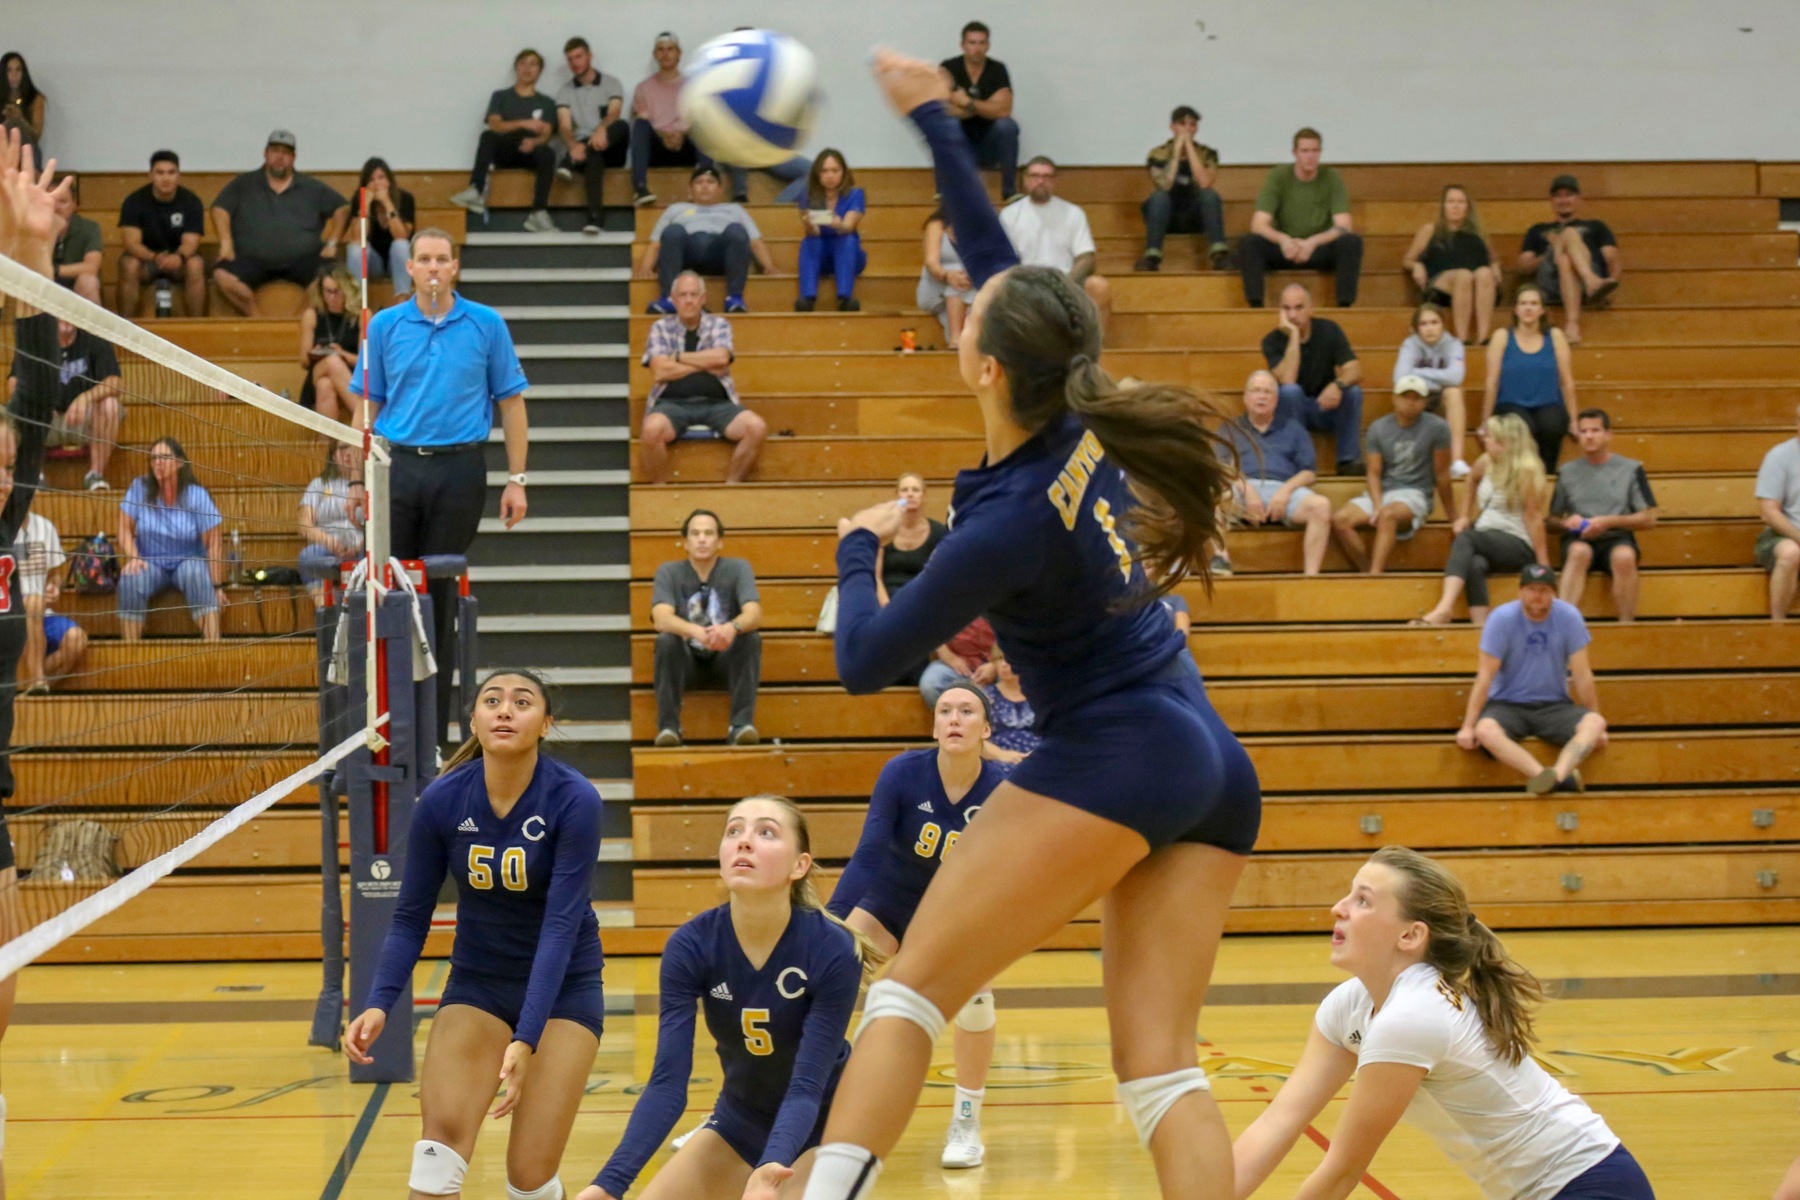 College of the Canyons sophomore Shayla Johnson recorded 15 kills and 16 digs to help lead the Lady Cougars to a 3-0 sweep over Santa Barbara City College on Wednesday night in the Cougar Cage. Jesse Muñoz/COC Sports Information Director.